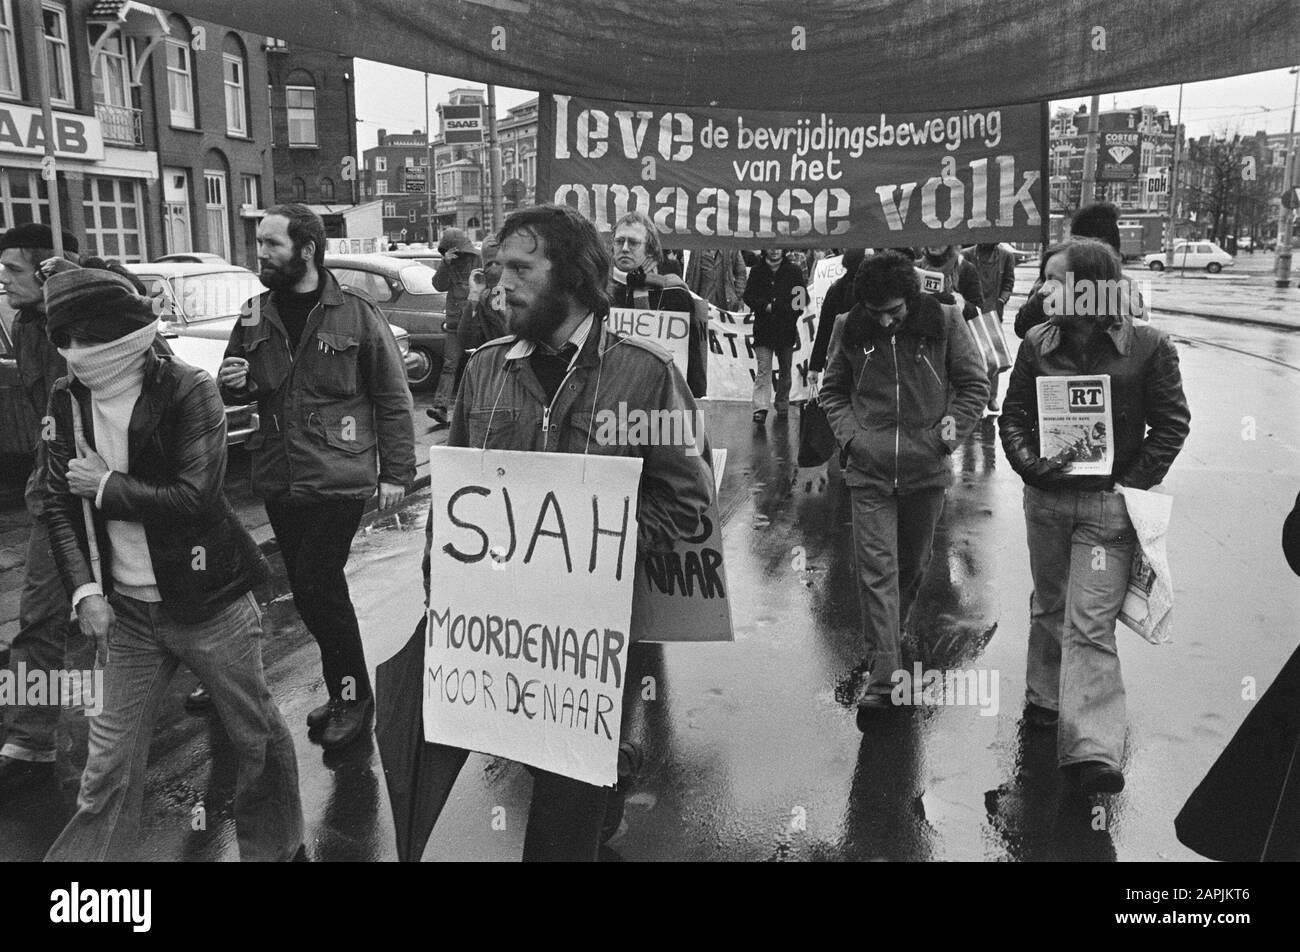 Demonstration against death sentences in Iran, in Amsterdam; protesters, left masked Iranian student Date: January 24, 1976 Location: Amsterdam, Iran Keywords: demonstrators, demonstrations, Students Stock Photo